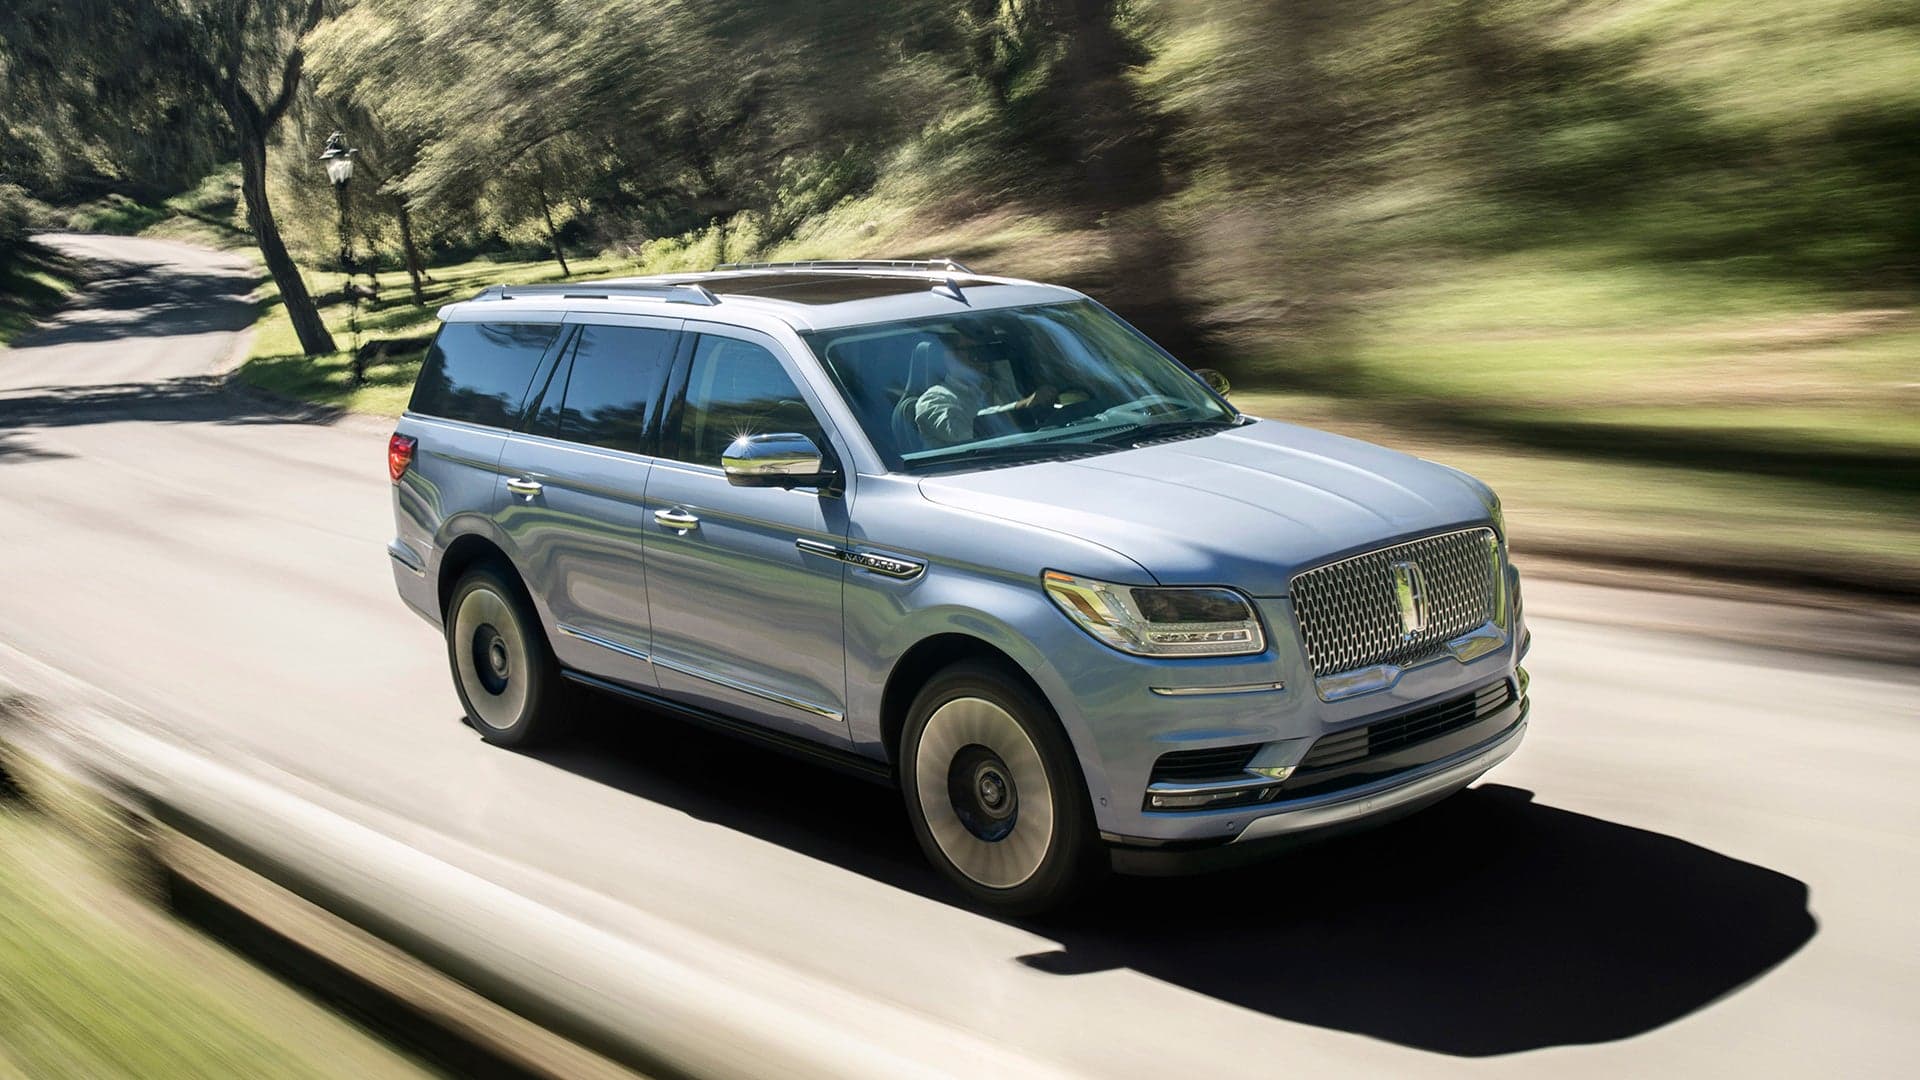 2018 Lincoln Navigator Review: The Navi Shakes Off the Old-Guy Image